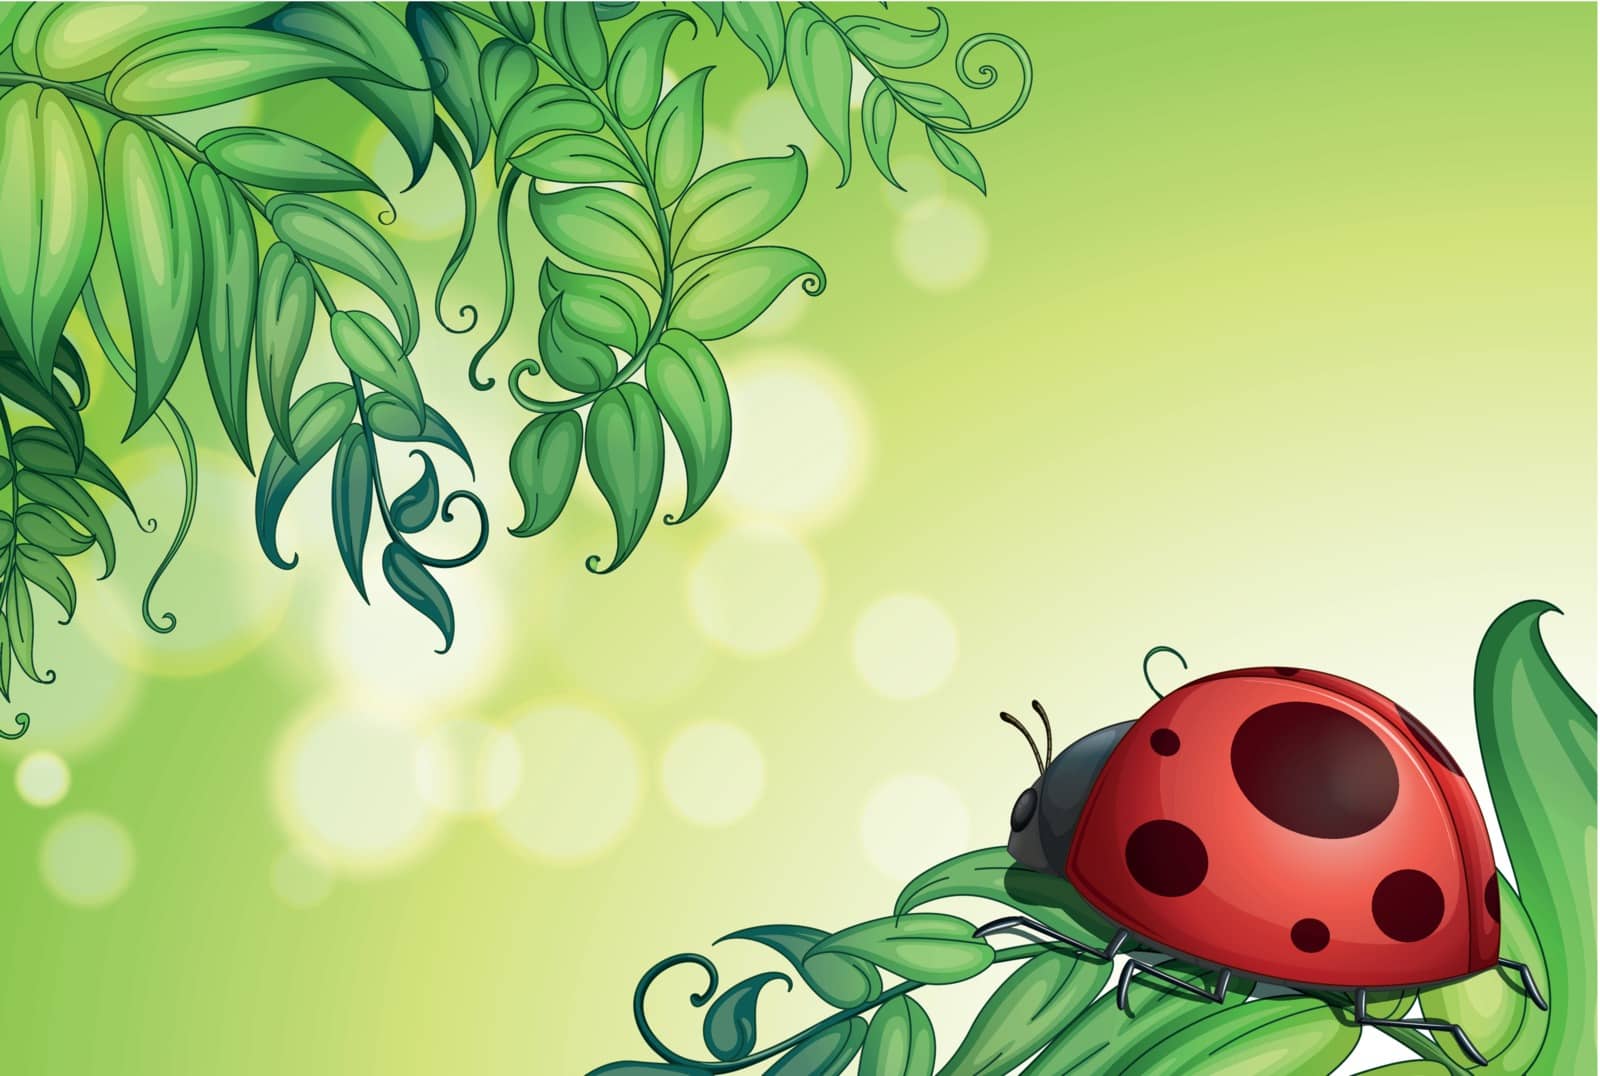 Illustration of a bug above the green leaves